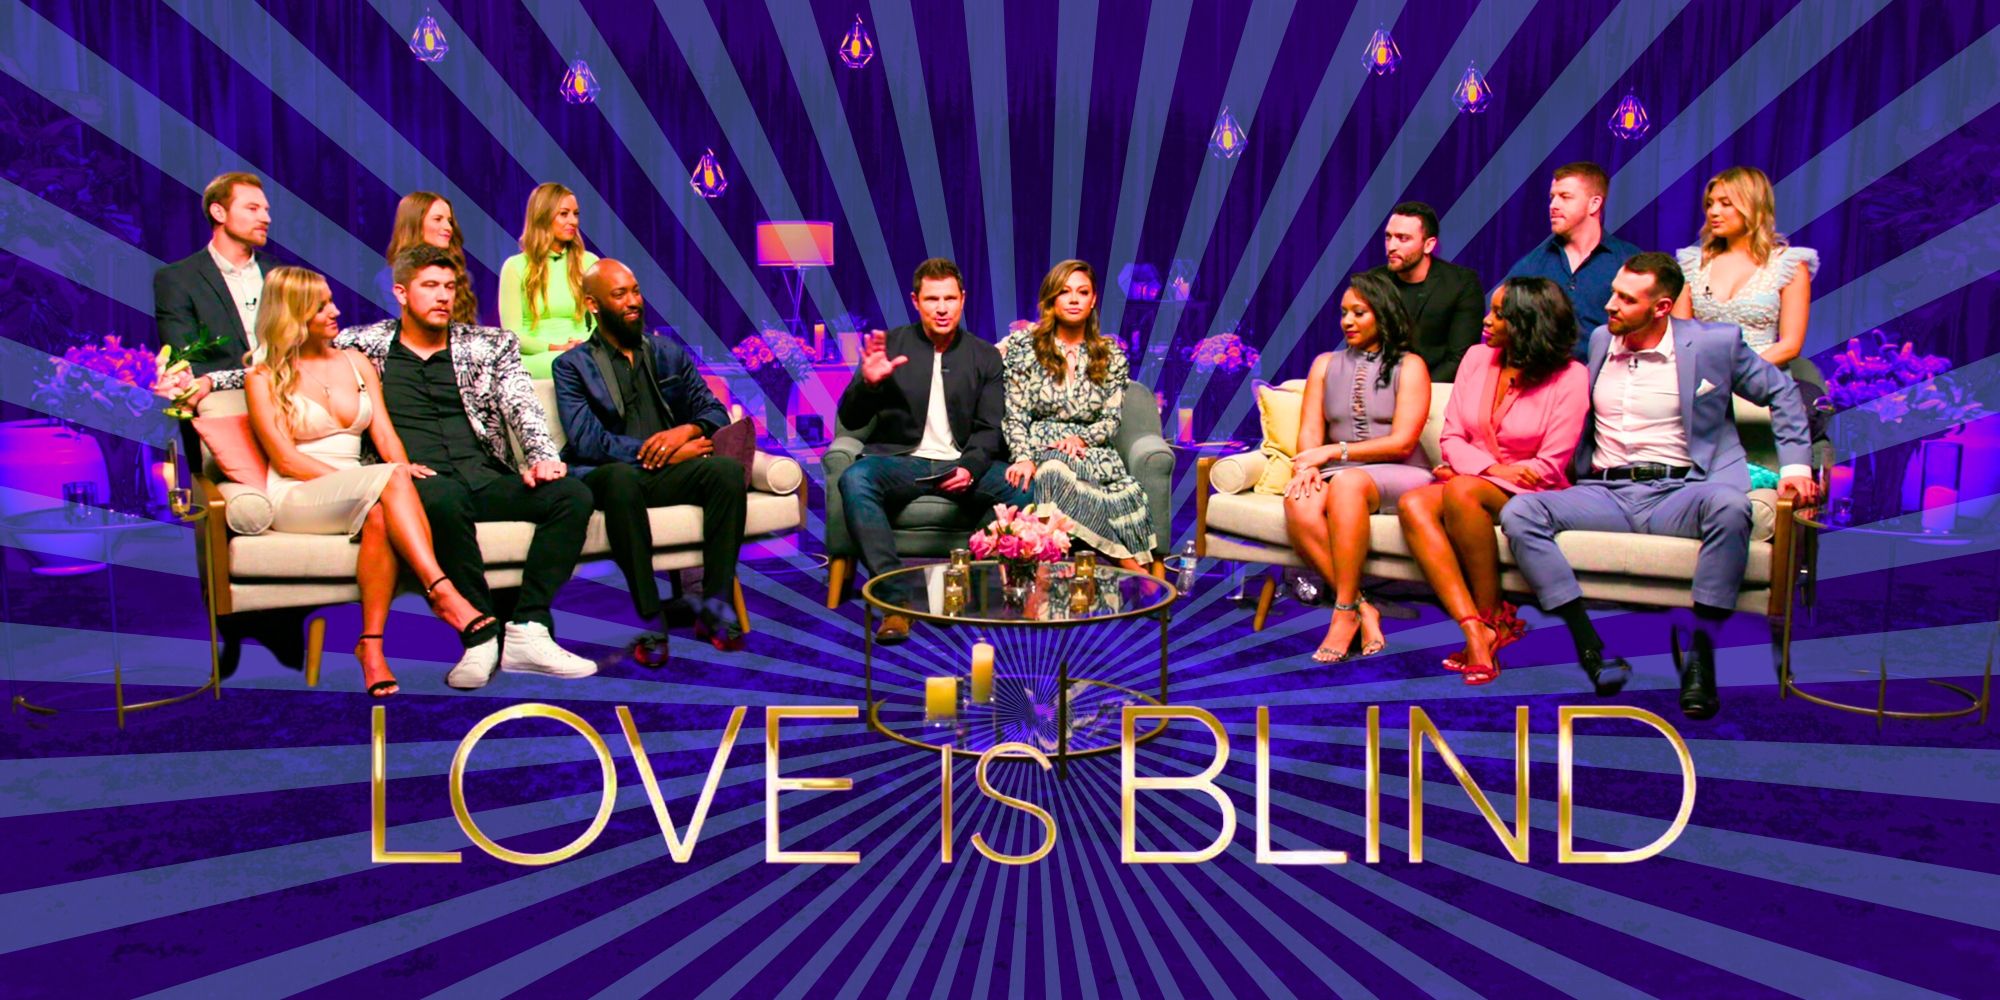  Love Is Blind Season 1 cast in promo shot sitting on couches with show logo in front